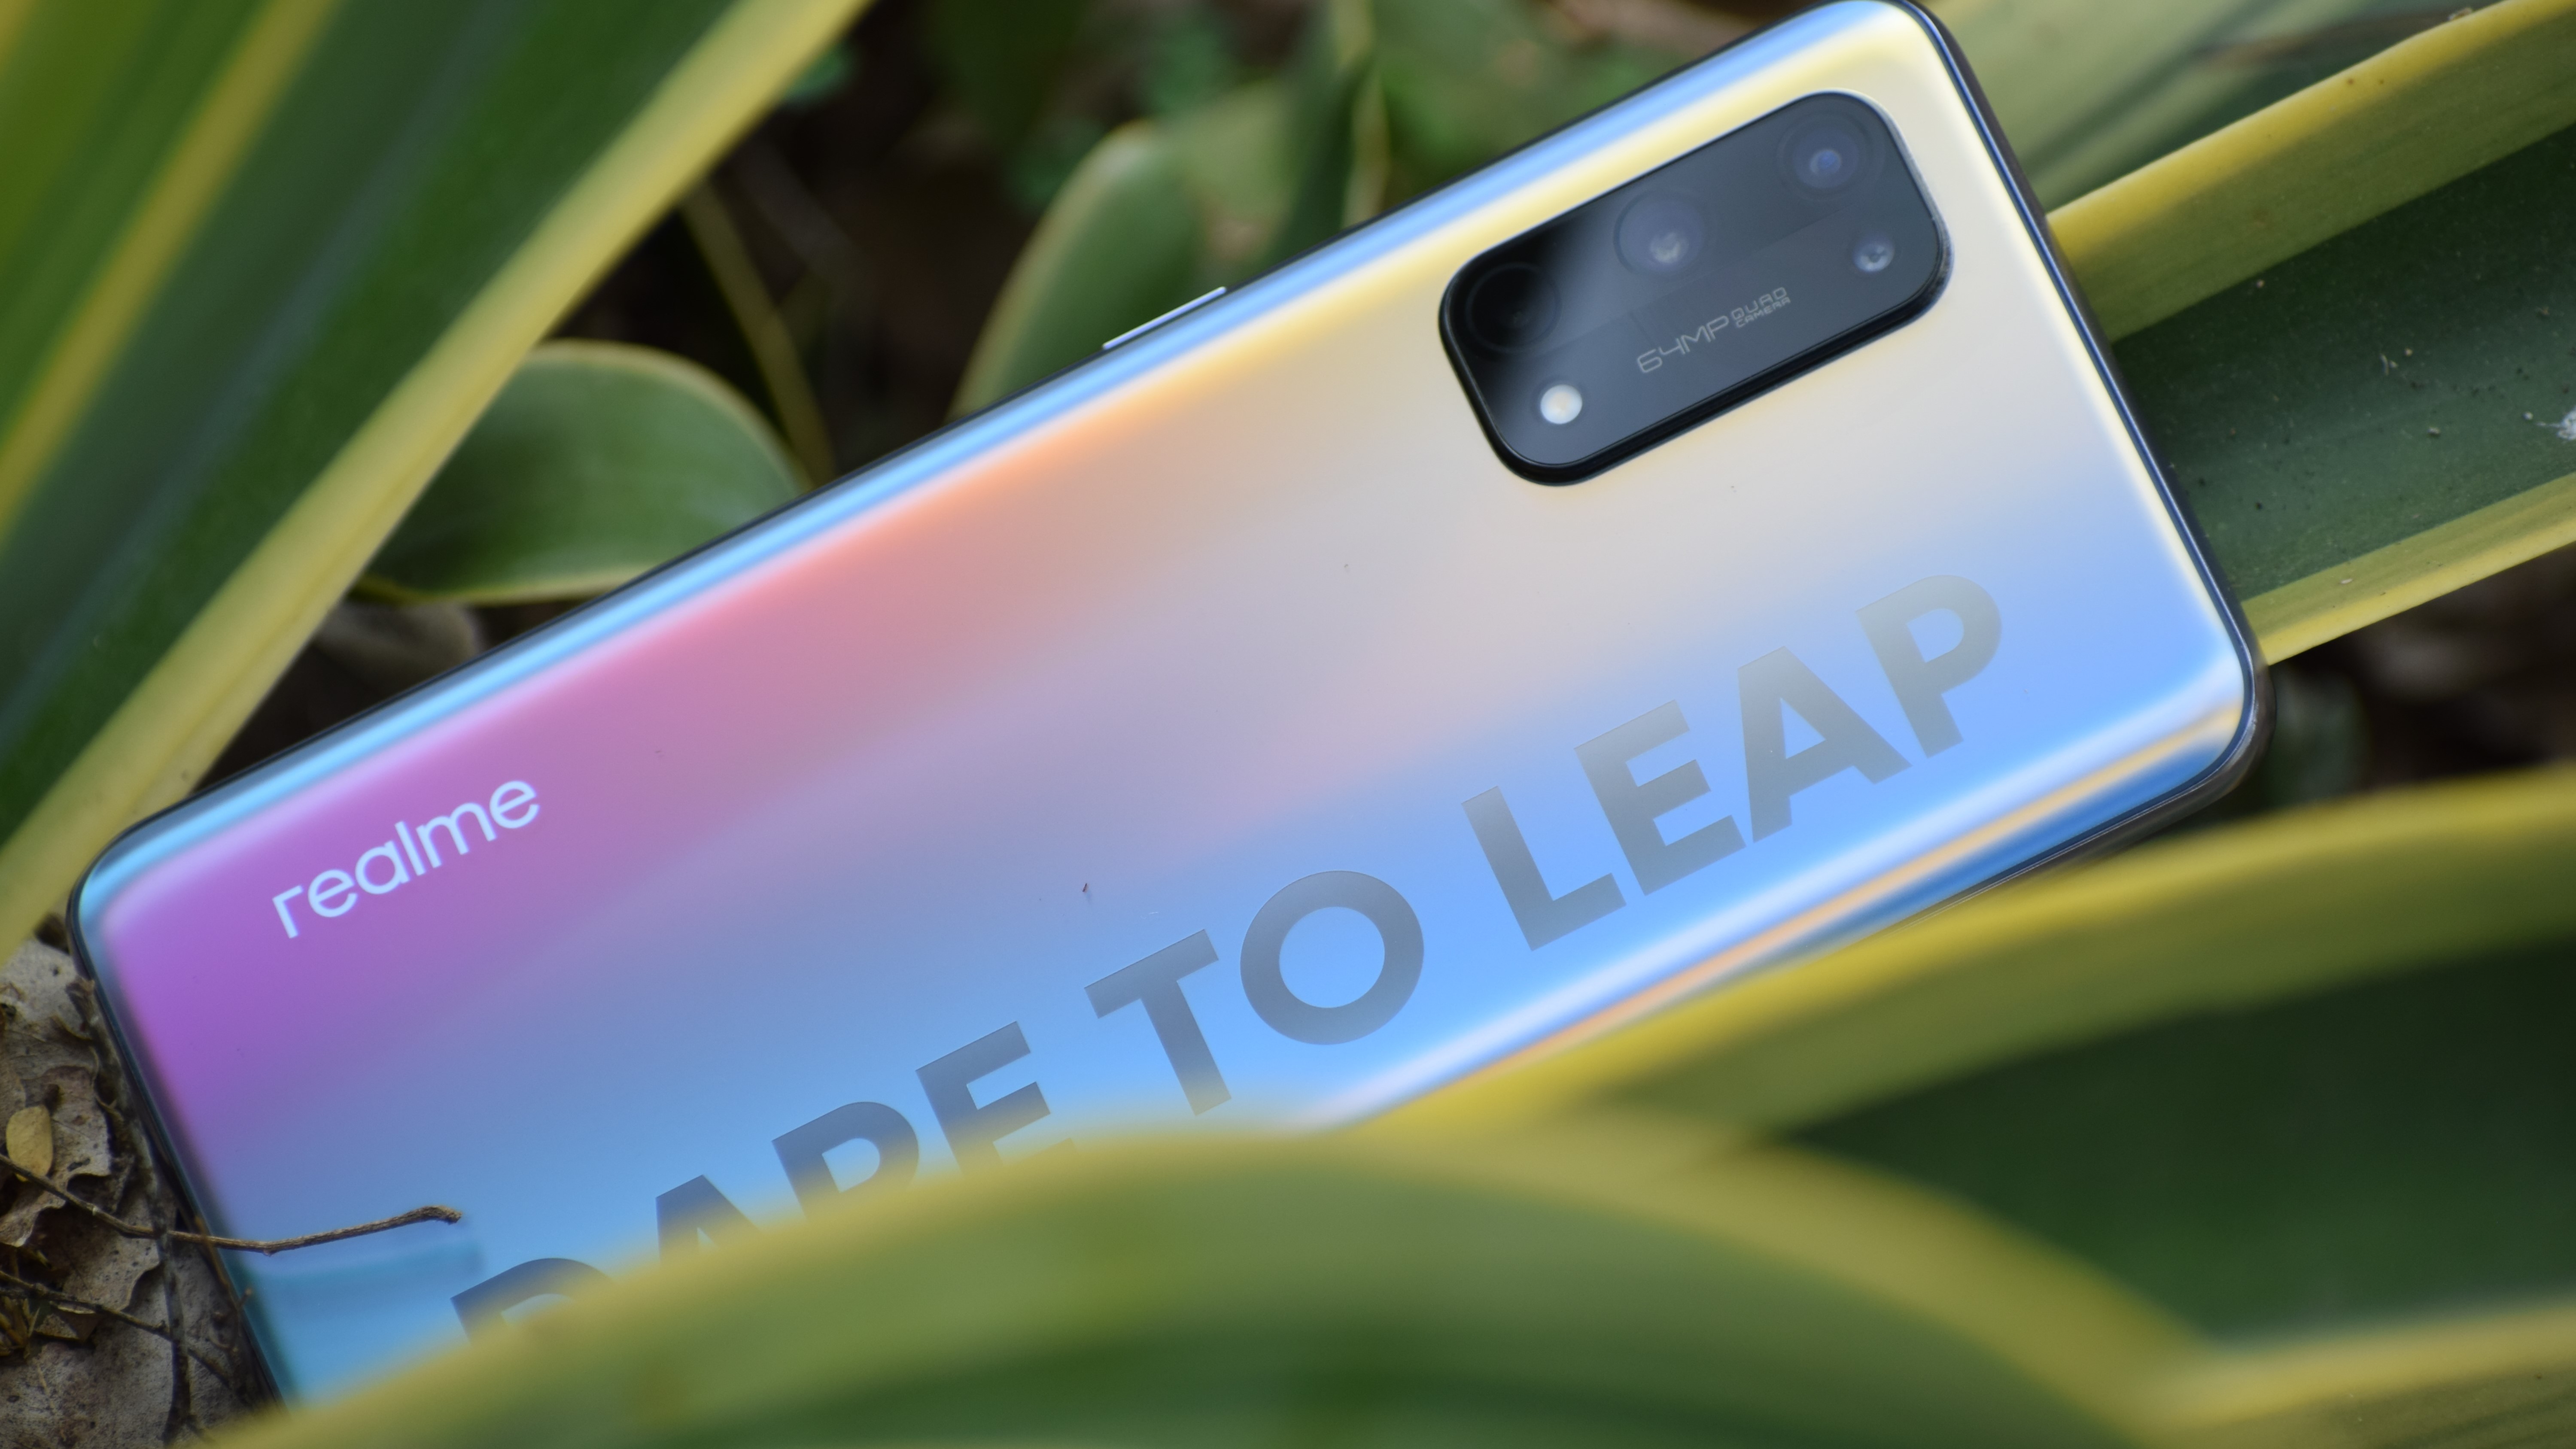 What are Realme phones? A guide to the company and its smartphones